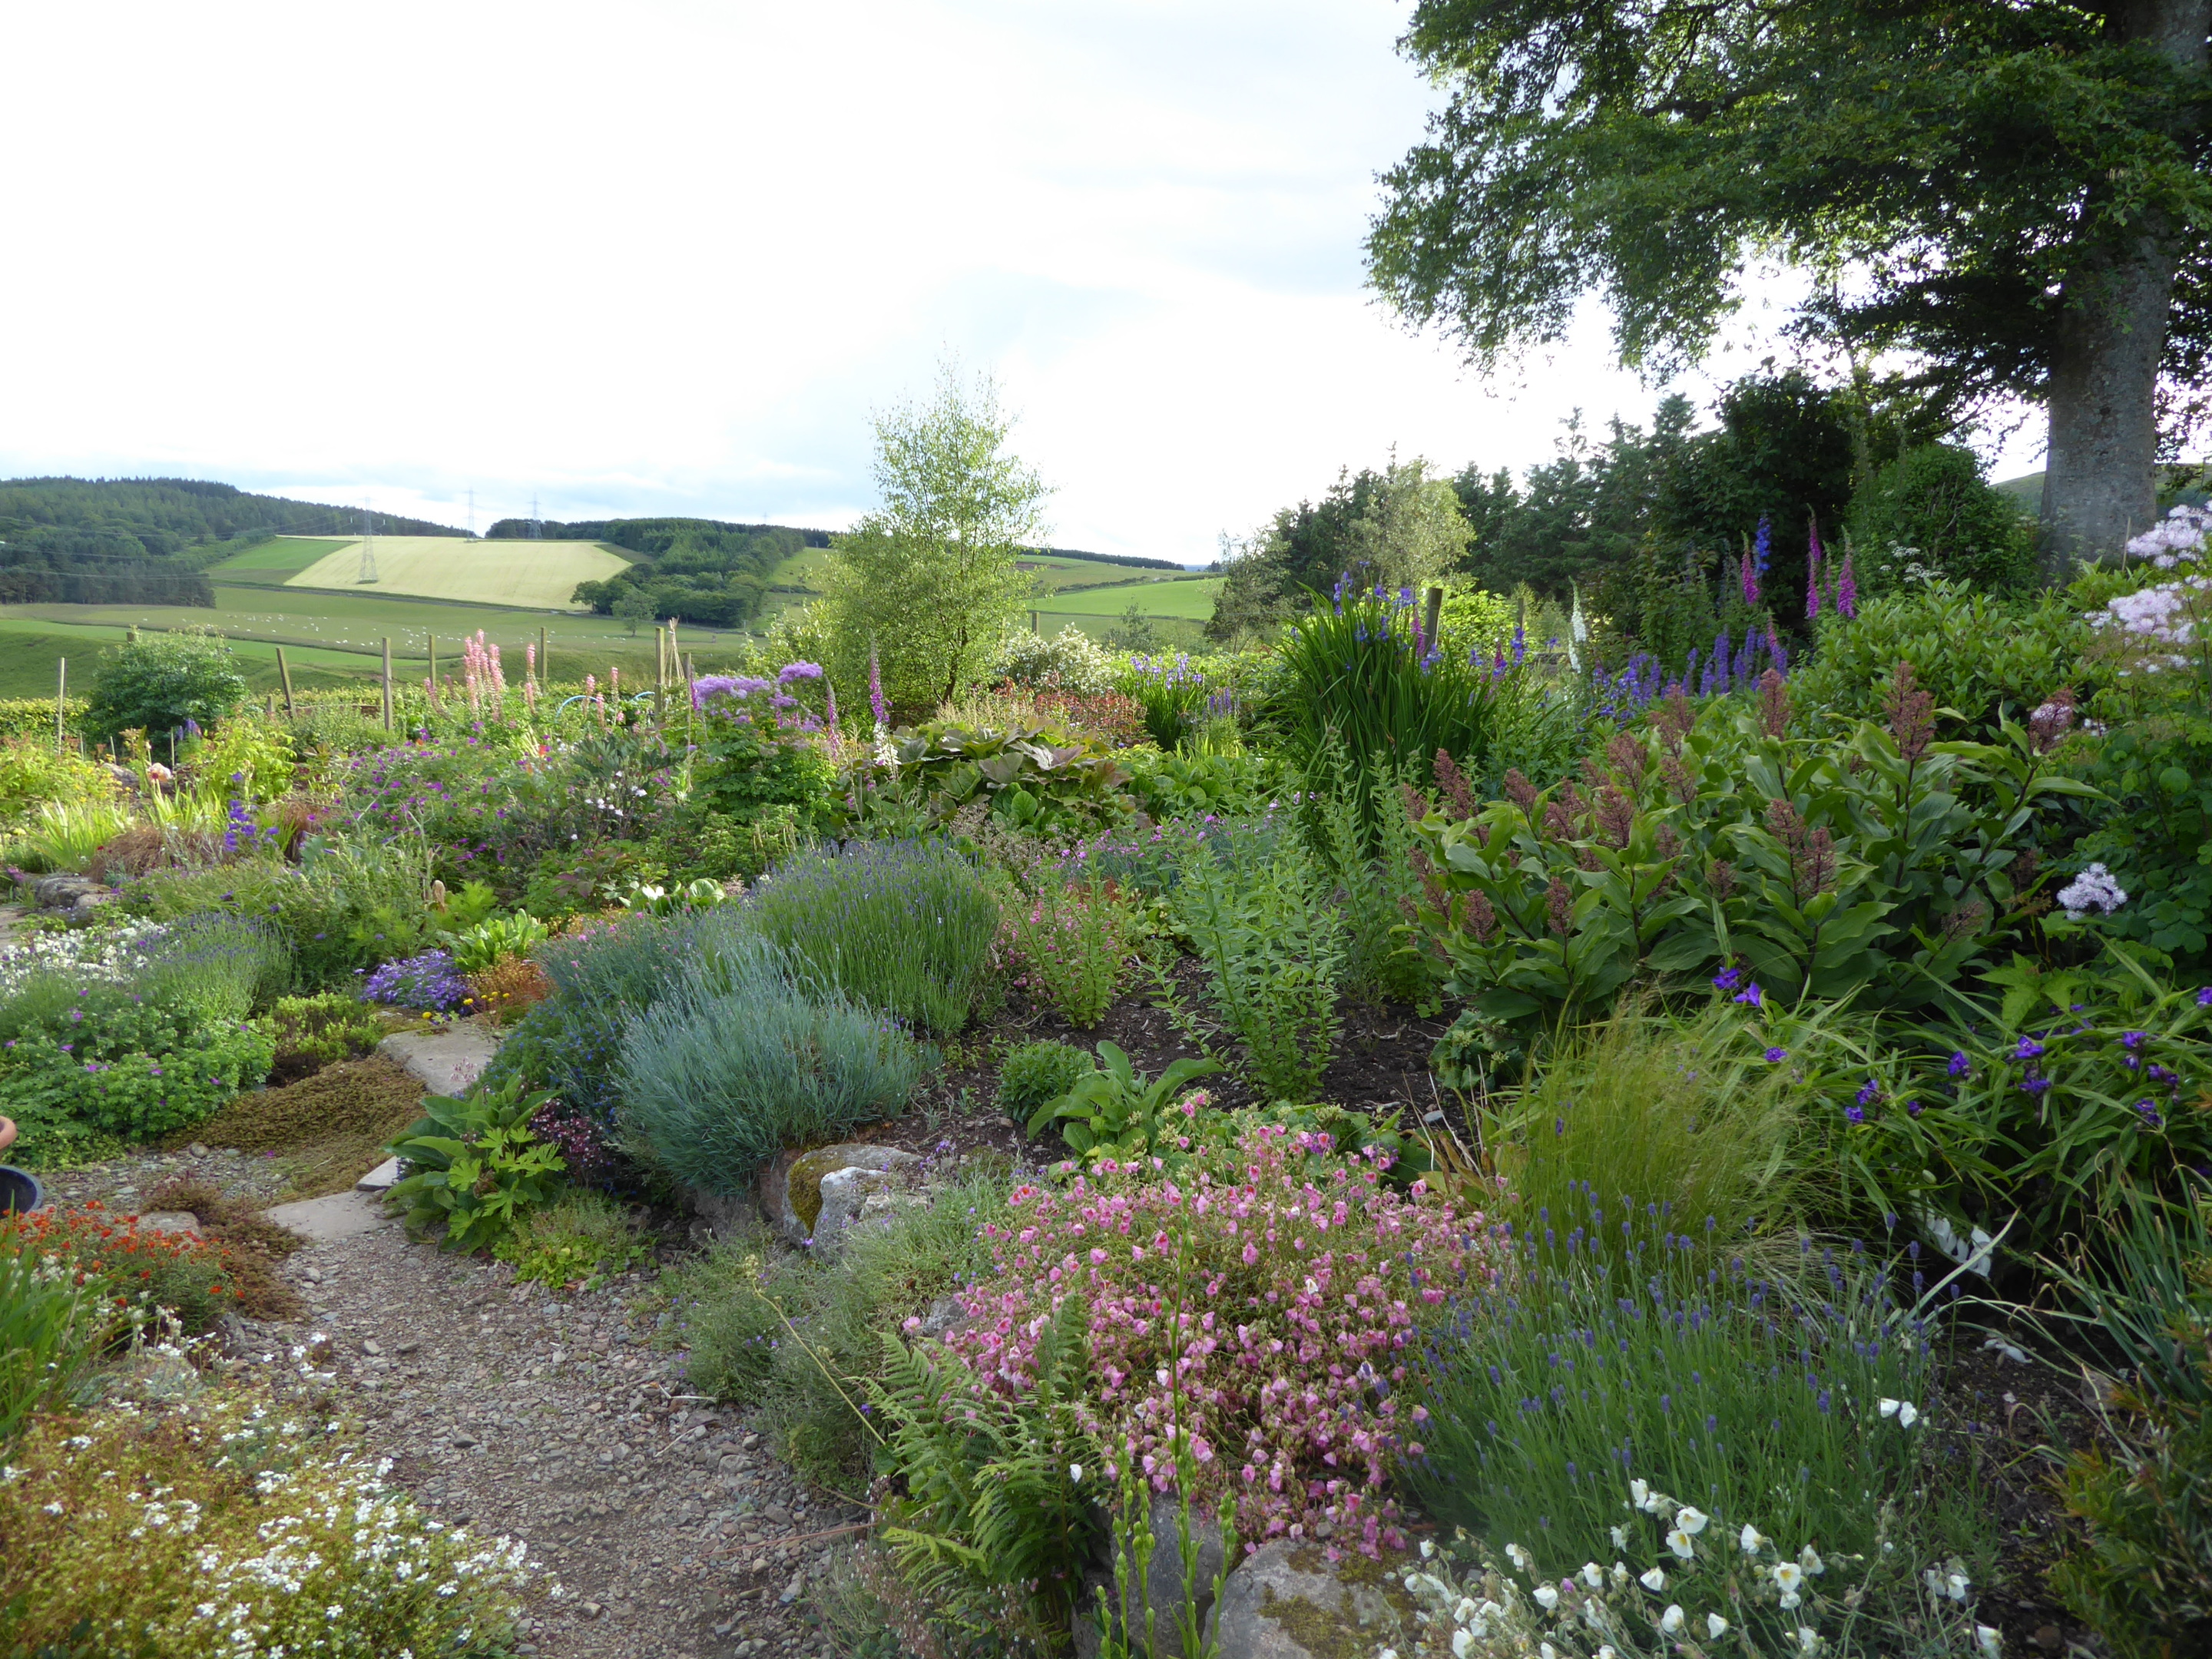 One of the gardens on display at the Auchenblae event.